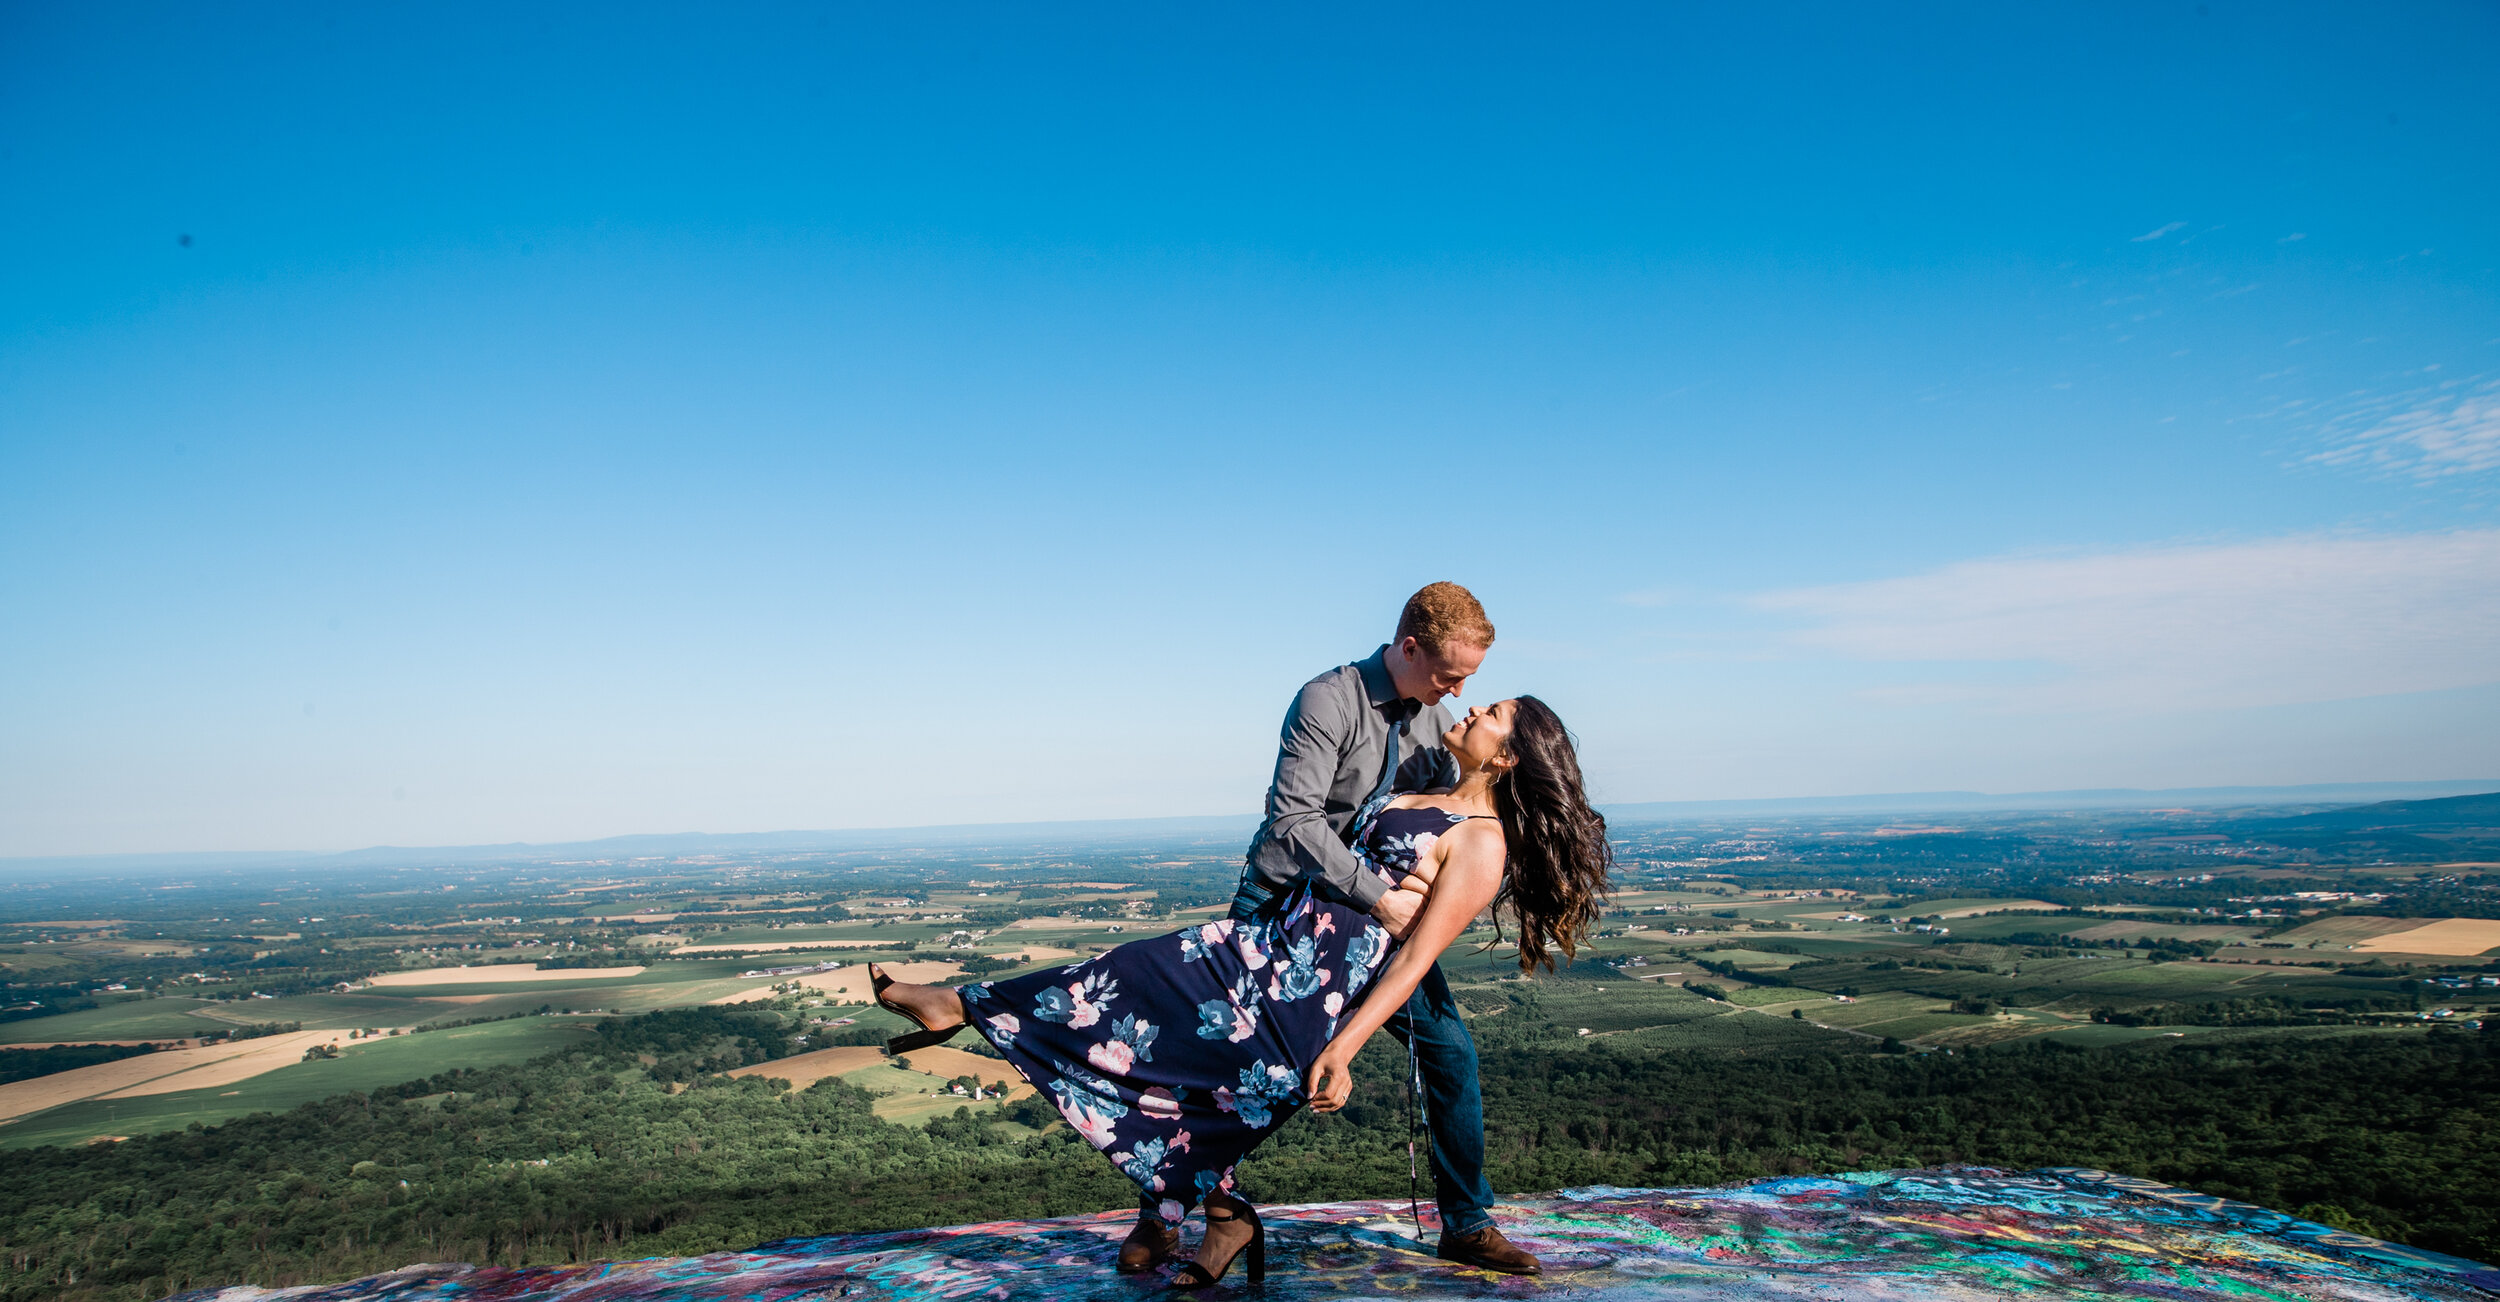 Engagement Session at High Rock Mountain in Western Maryland by Megapixels Media Photography best husband and wife wedding photographers-6.jpg